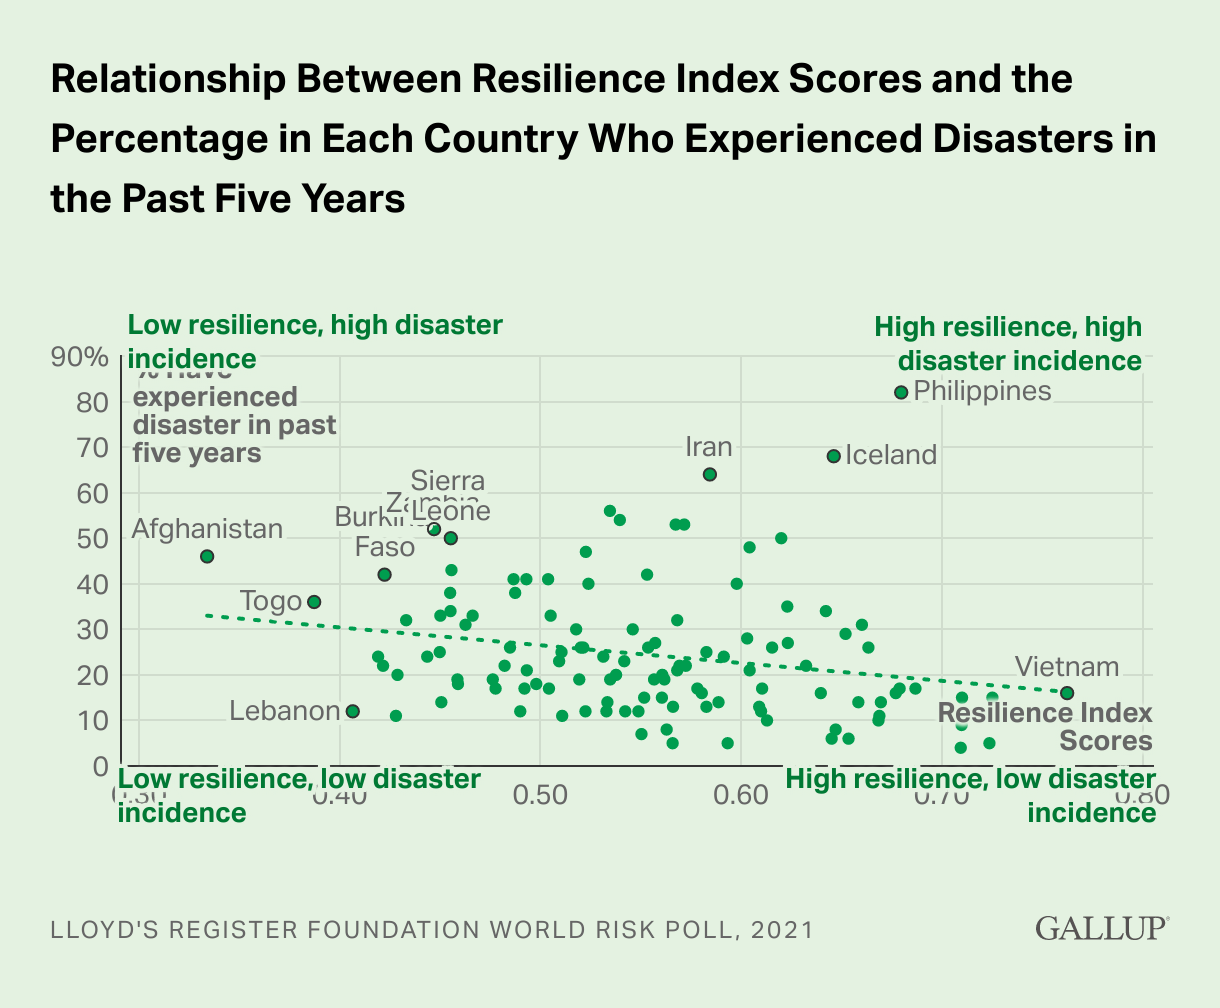 Experience with disasters was more common in countries with low resilience scores.